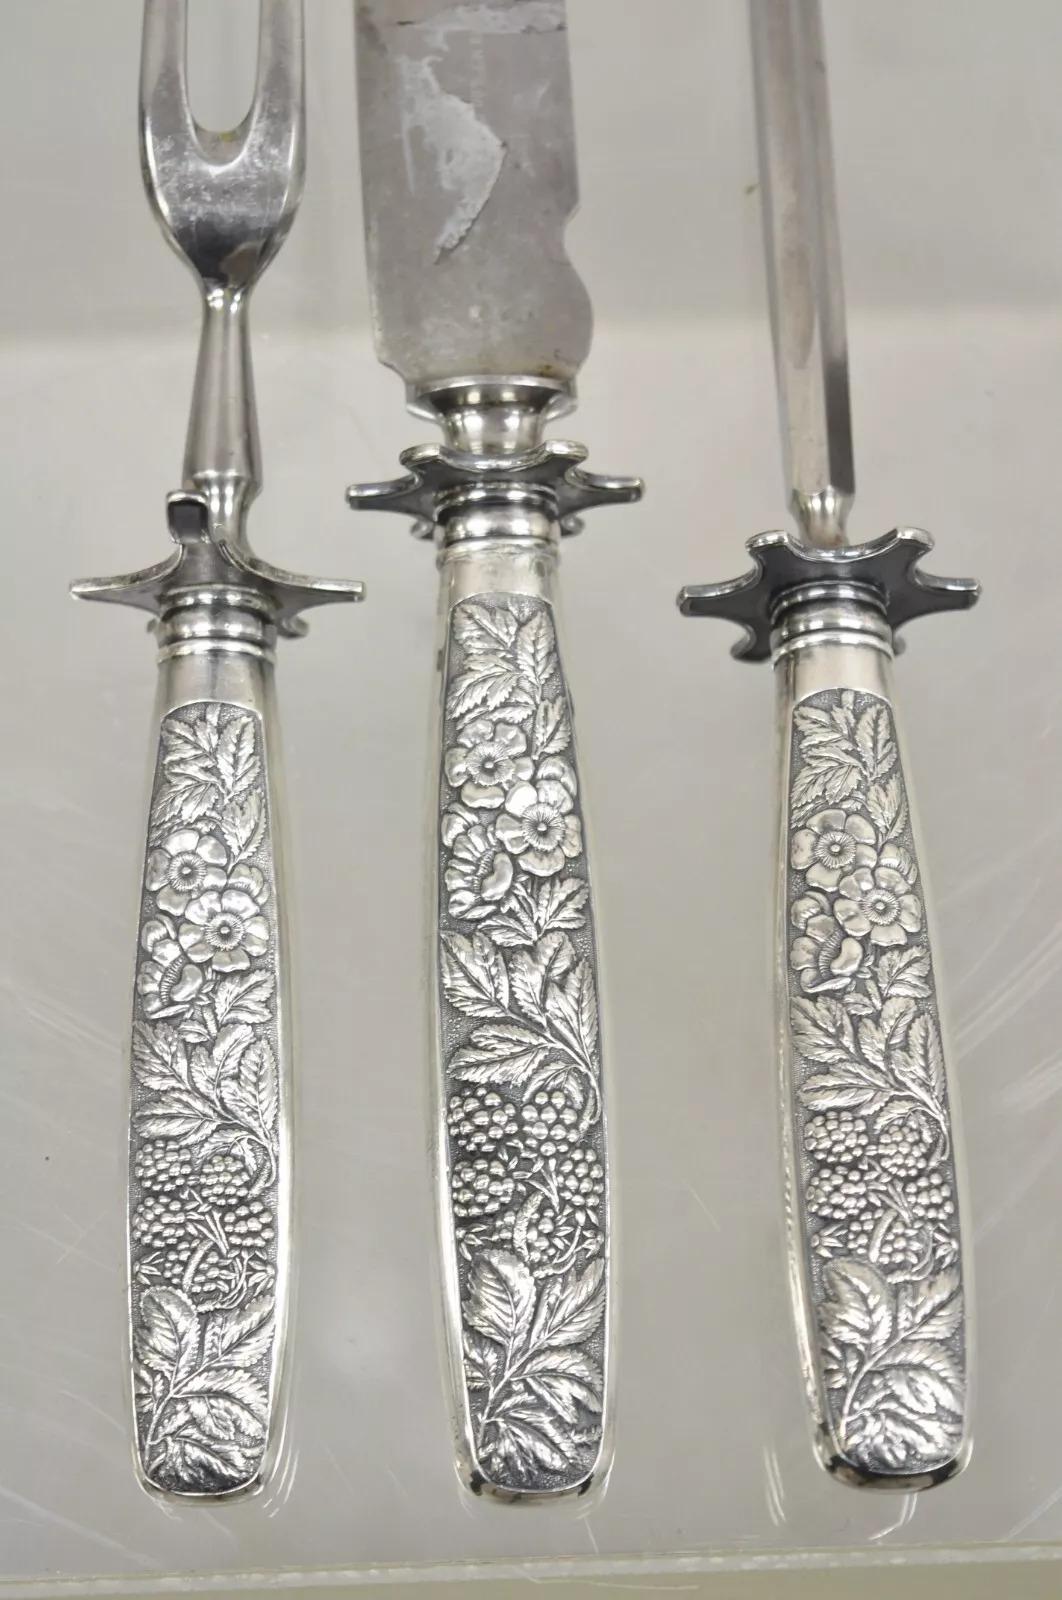 Antique R Wallace & Sons Victorian Silver Plated Repousse Meat Carving Set - 3 Pc Set (Knife, Fork, Sharpener)  Circa Early to Mid 20th Century.
Measurements:  
Knife: 15